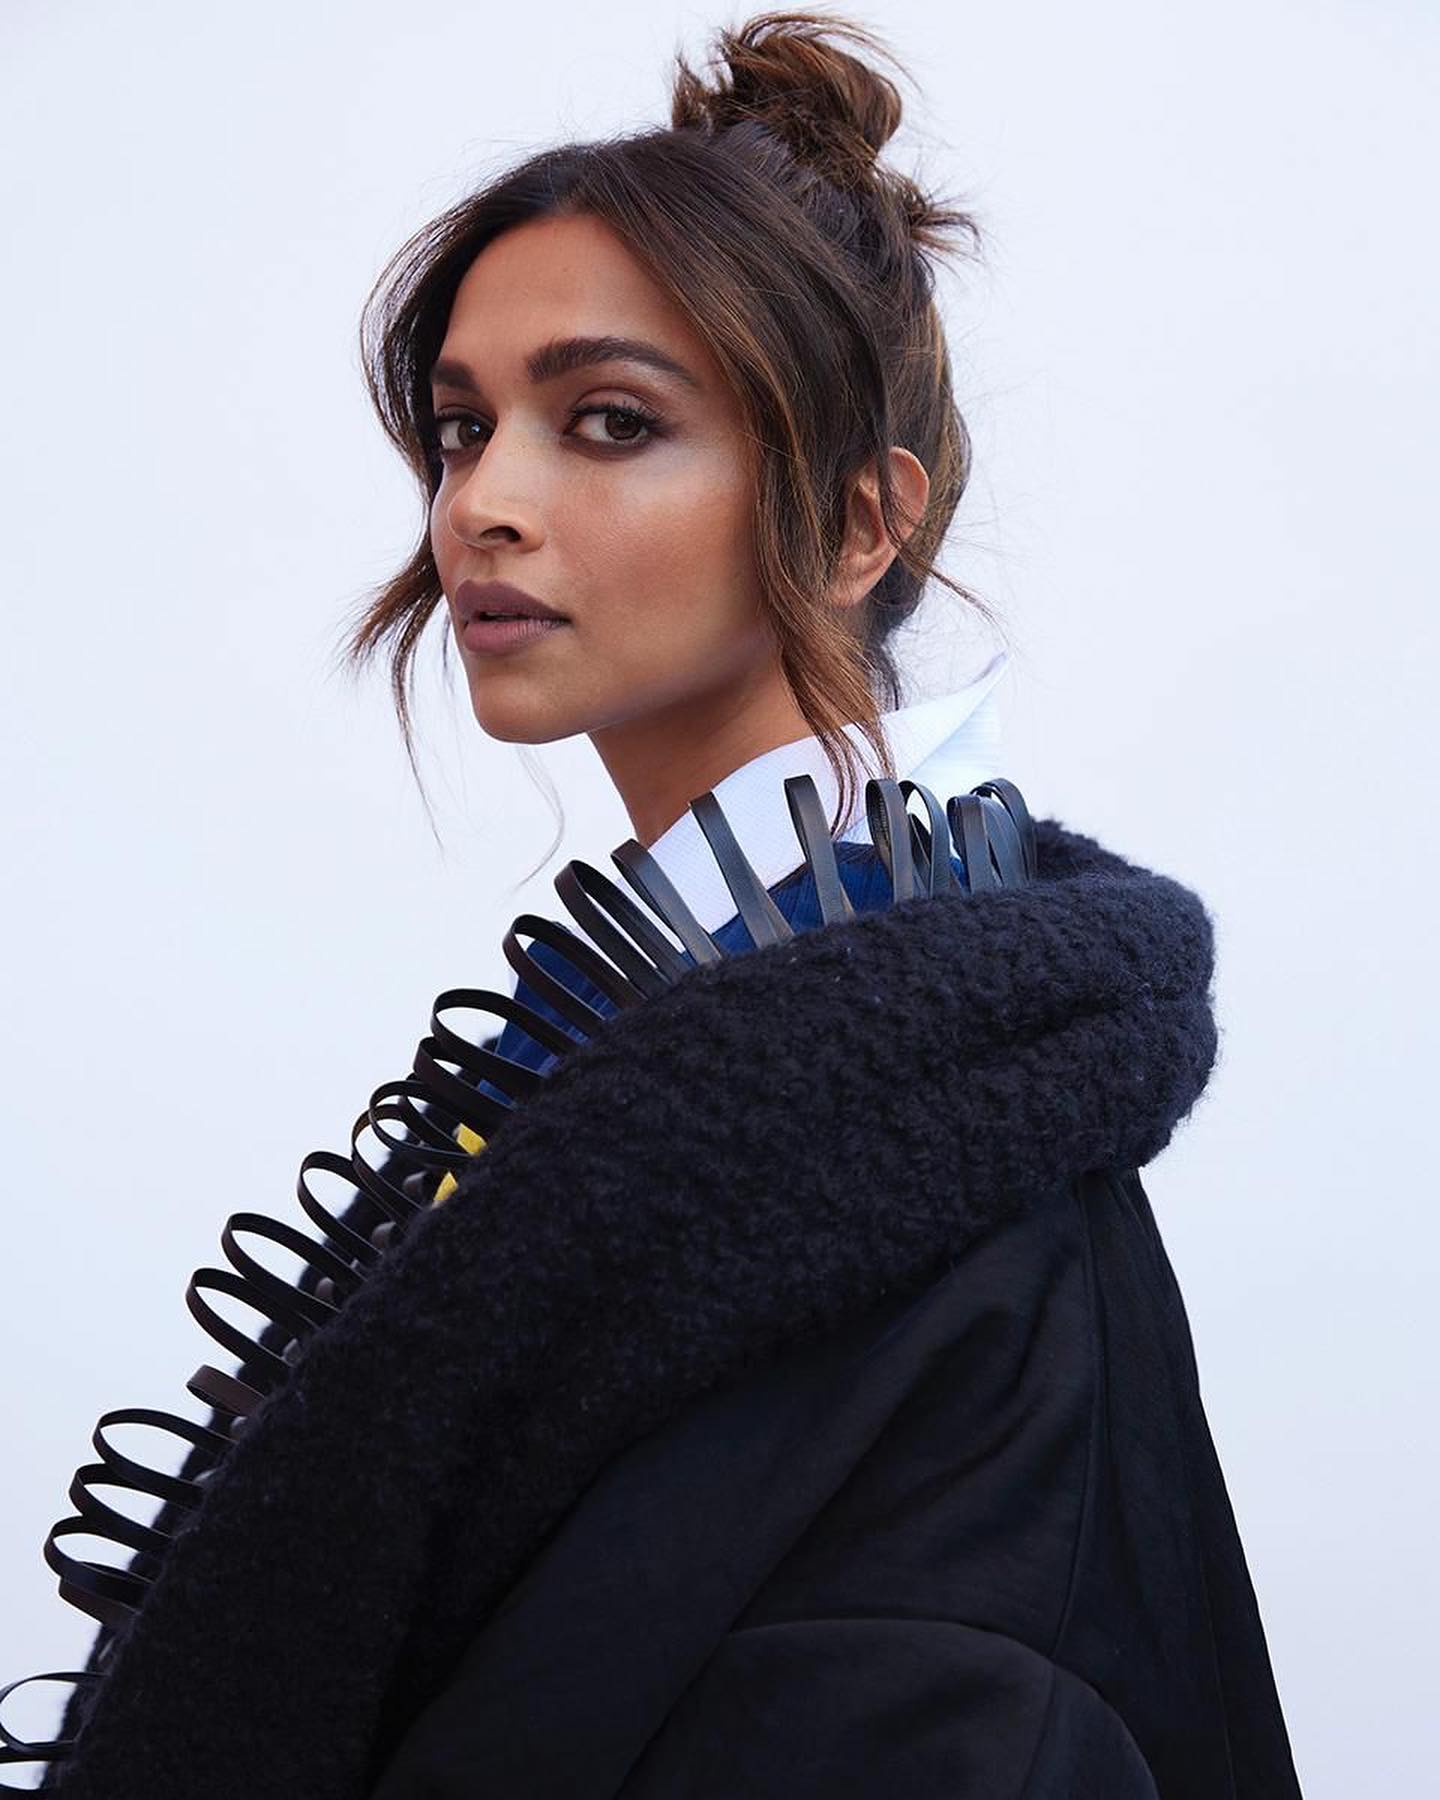 Deepika Padukone photoshoot for Louis Vuitton done by Nicolas Ghesquiere, May 2022